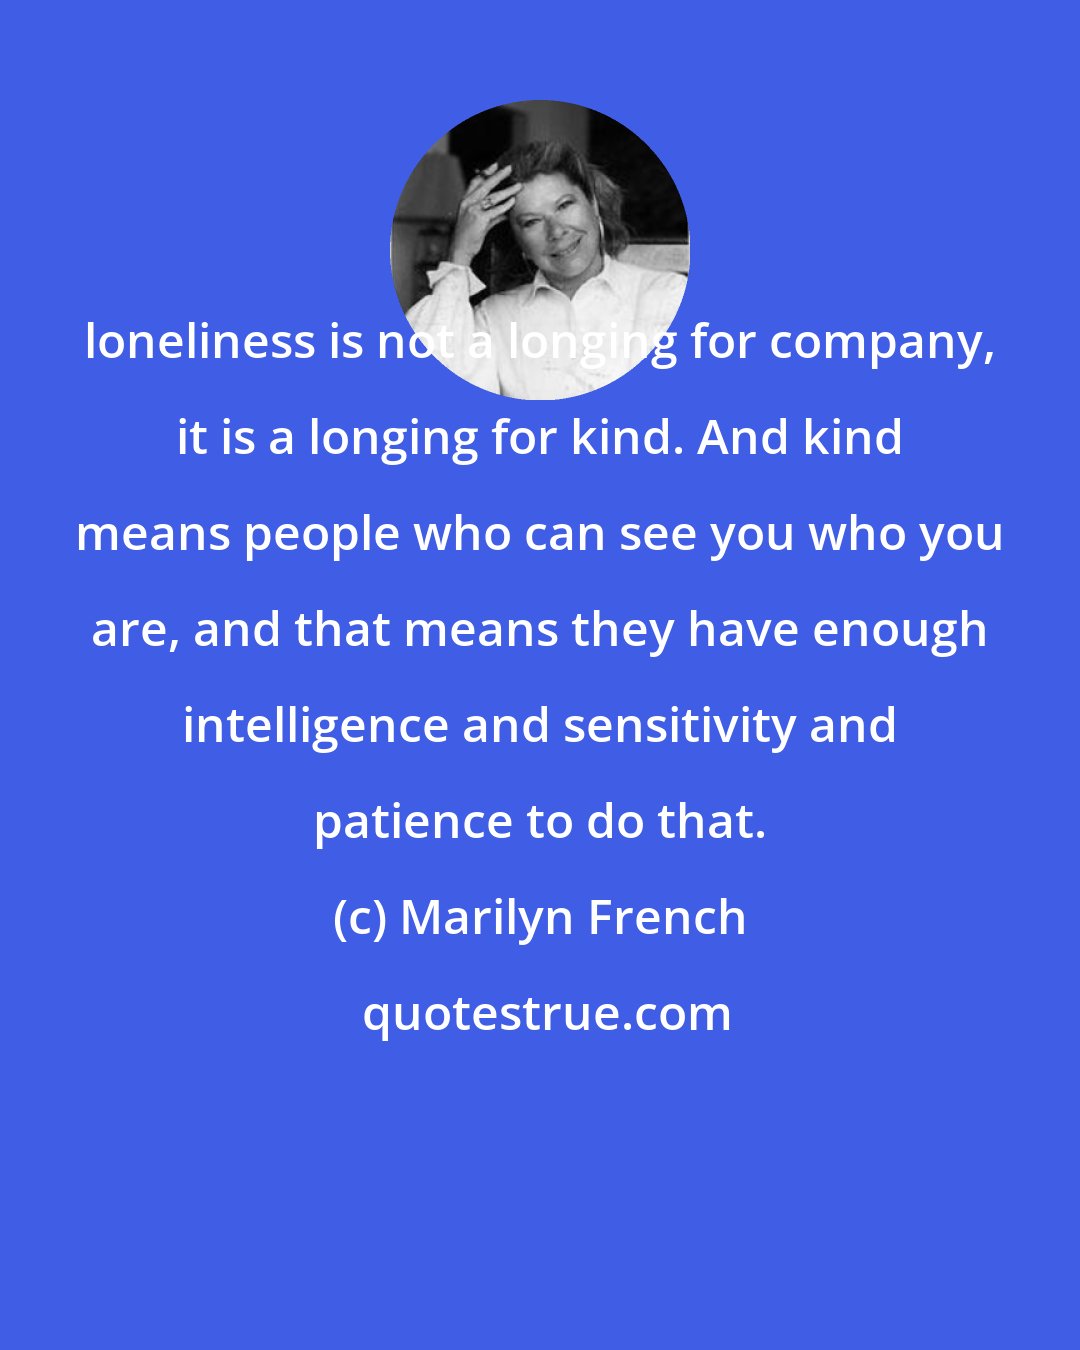 Marilyn French: loneliness is not a longing for company, it is a longing for kind. And kind means people who can see you who you are, and that means they have enough intelligence and sensitivity and patience to do that.